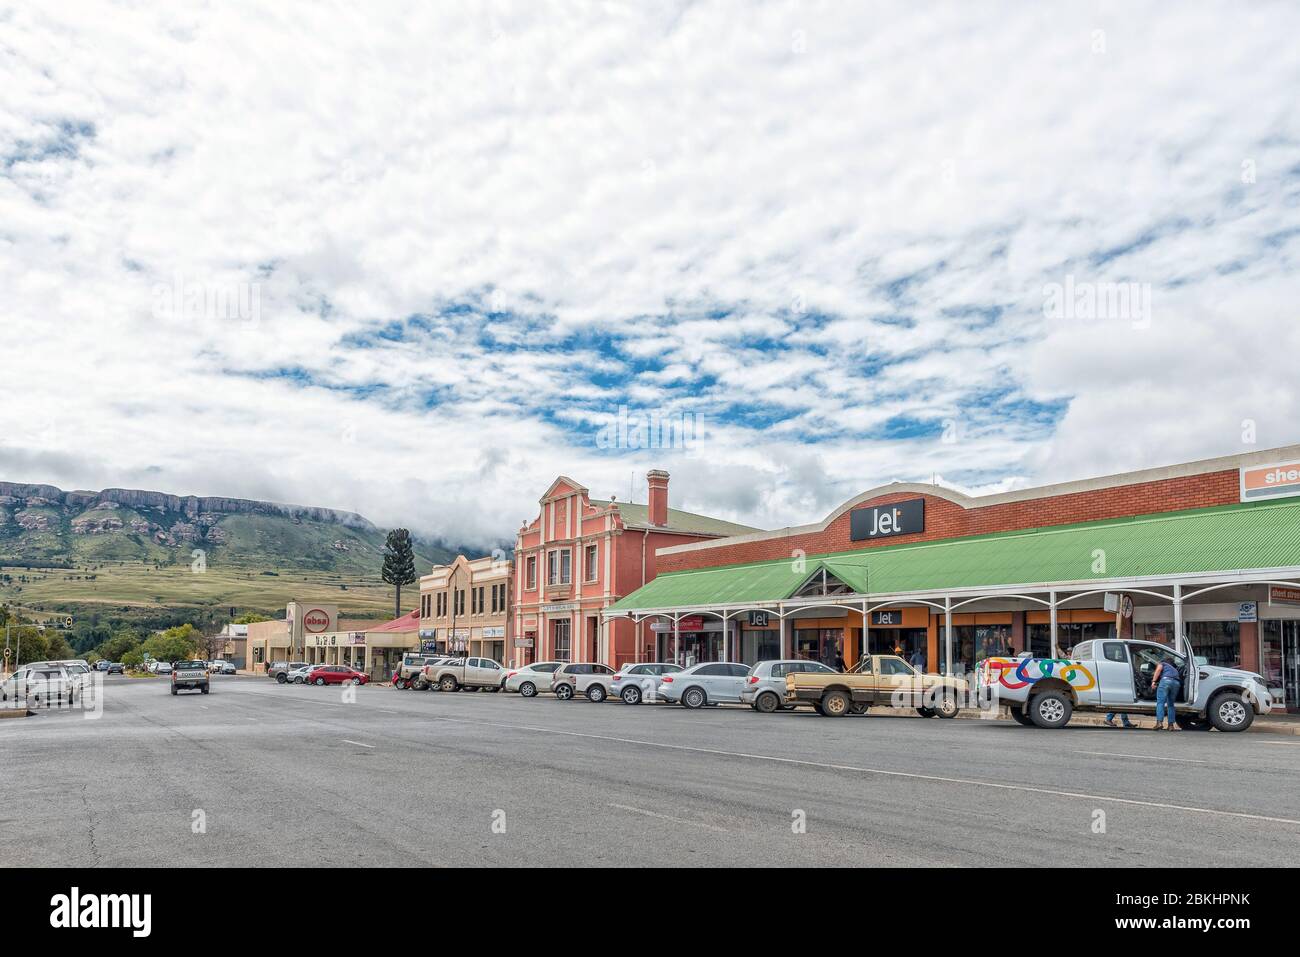 HARRISMITH, SOUTH AFRICA - MARCH 16, 2020:  A street scene, with businesses and vehicles, in Harrismith in the Free State Province Stock Photo